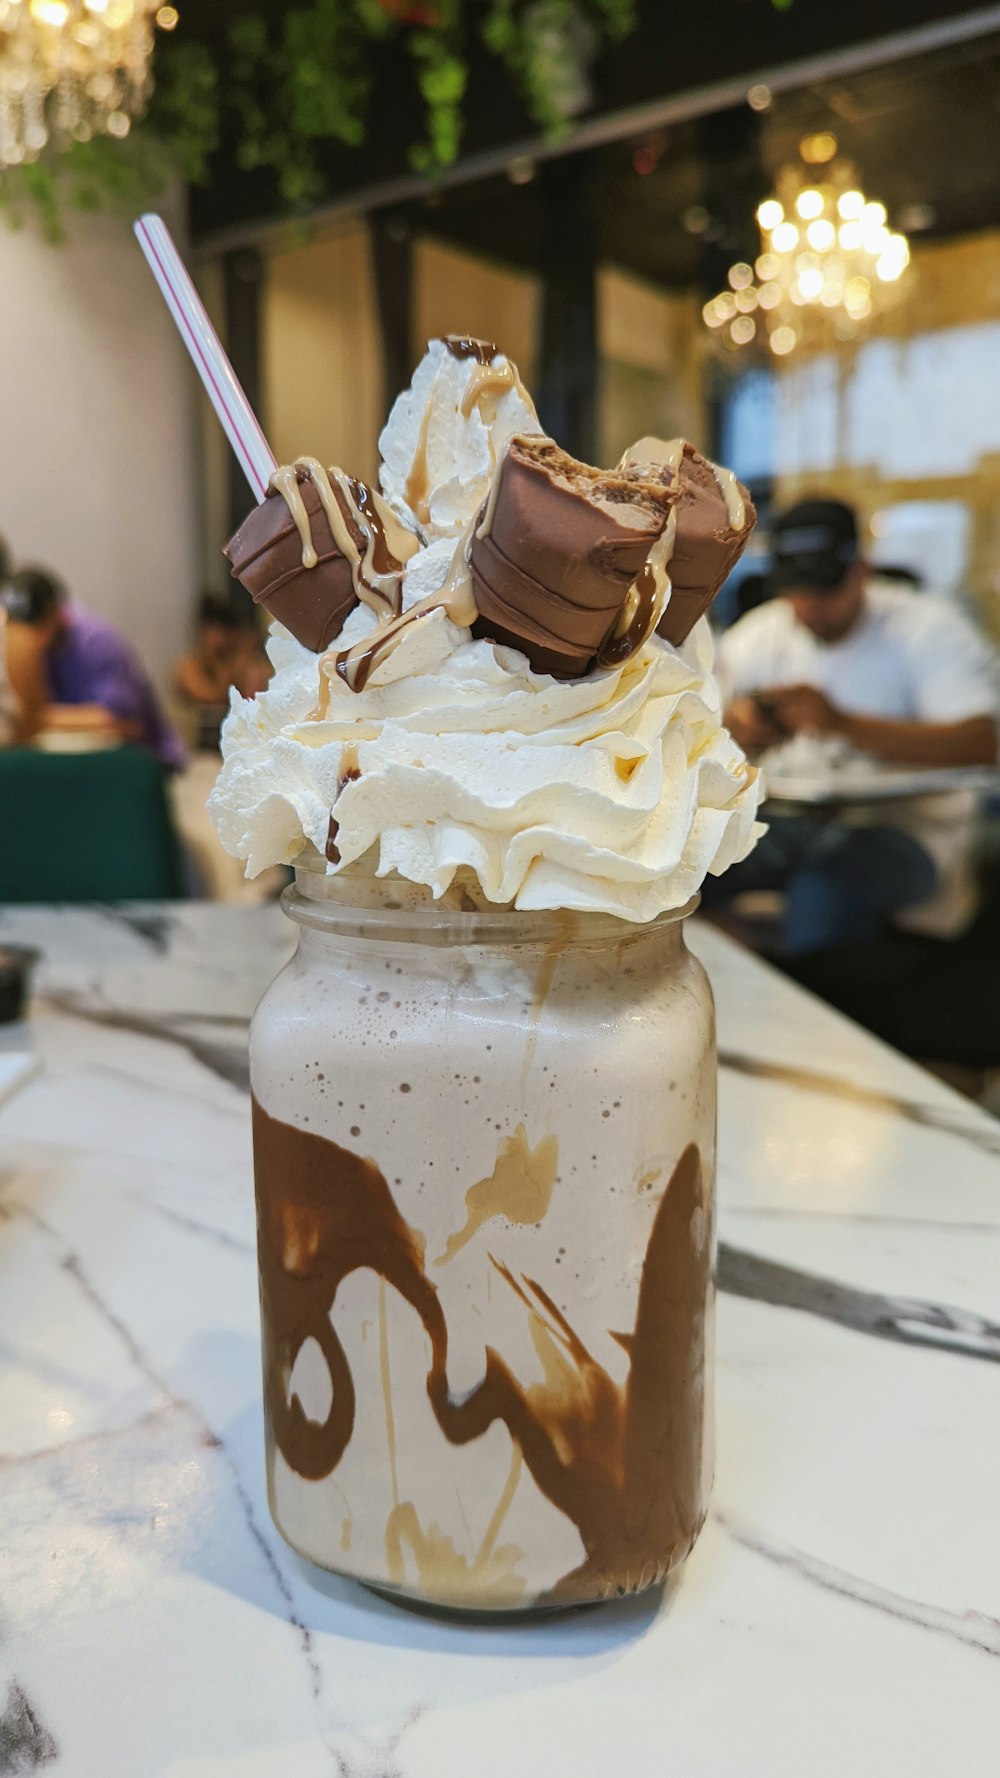 a glass jar filled with whipped cream and chocolate